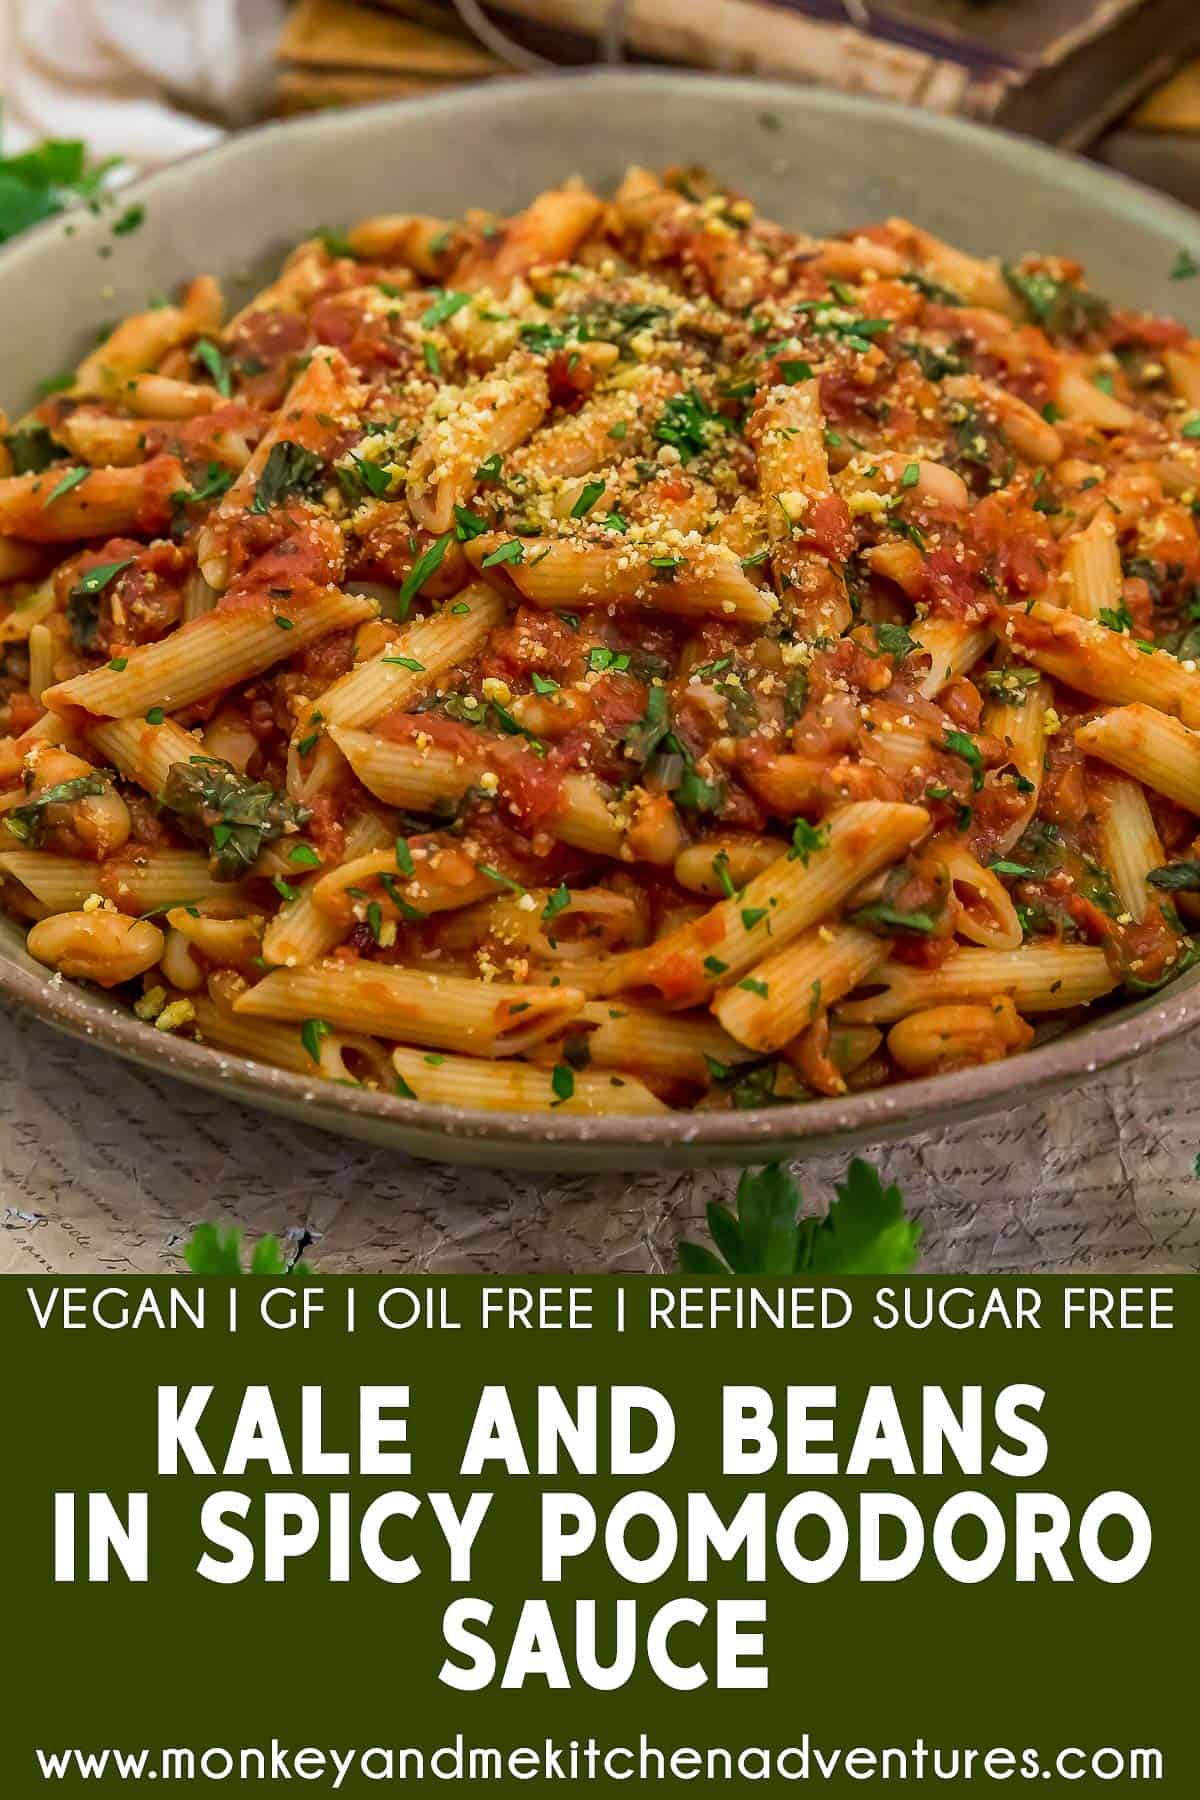 Kale and Beans in Spicy Pomodoro Sauce with text description